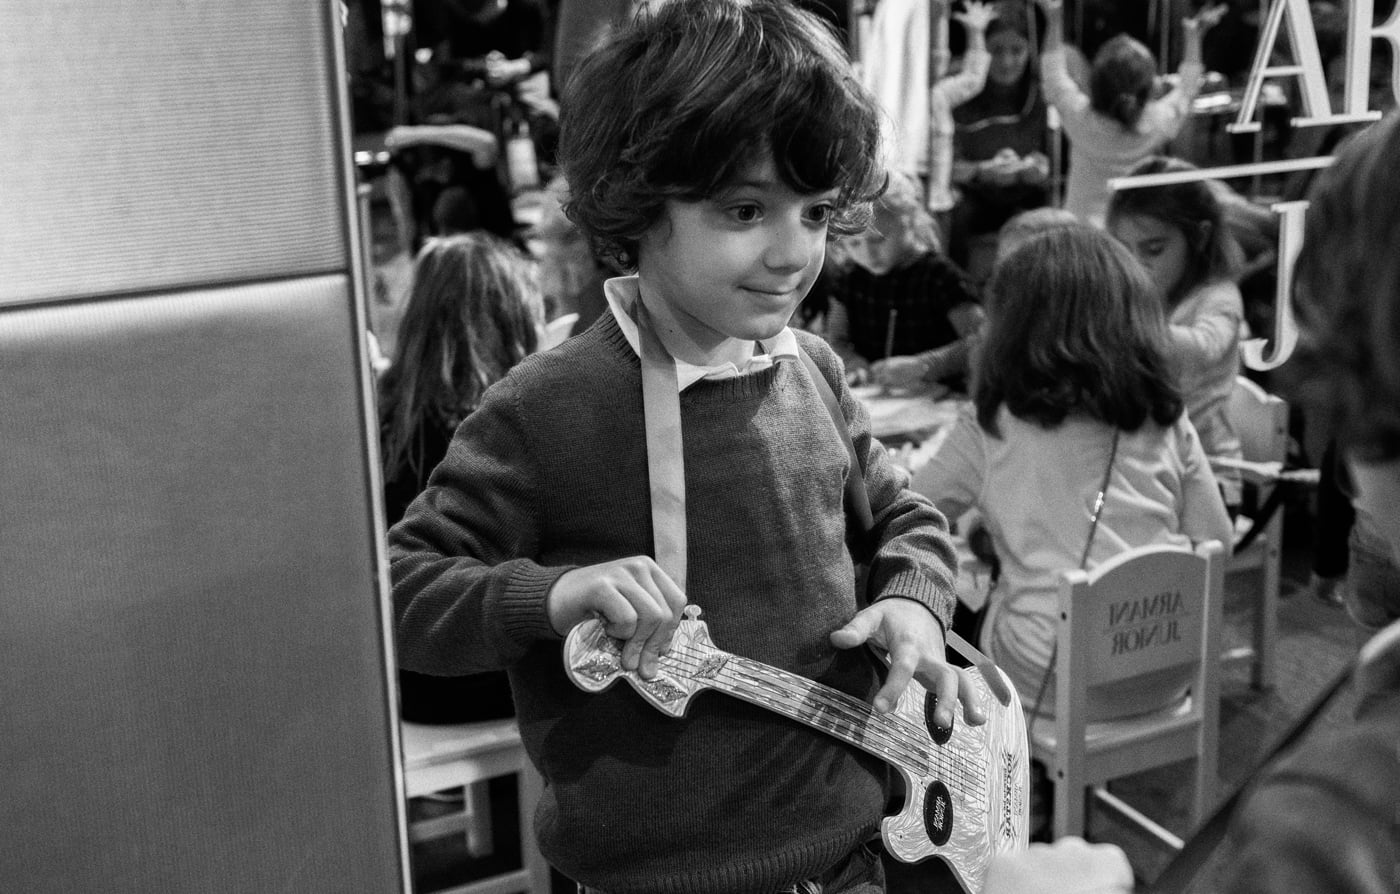 Looking back at the festive faces of Born to be a Rockstar - the Armani Junior Event held at the Emporio Armani Flagship Store in Milan.
Behind the scenes. Riccardo Polcaro, fotografo moda bambino.